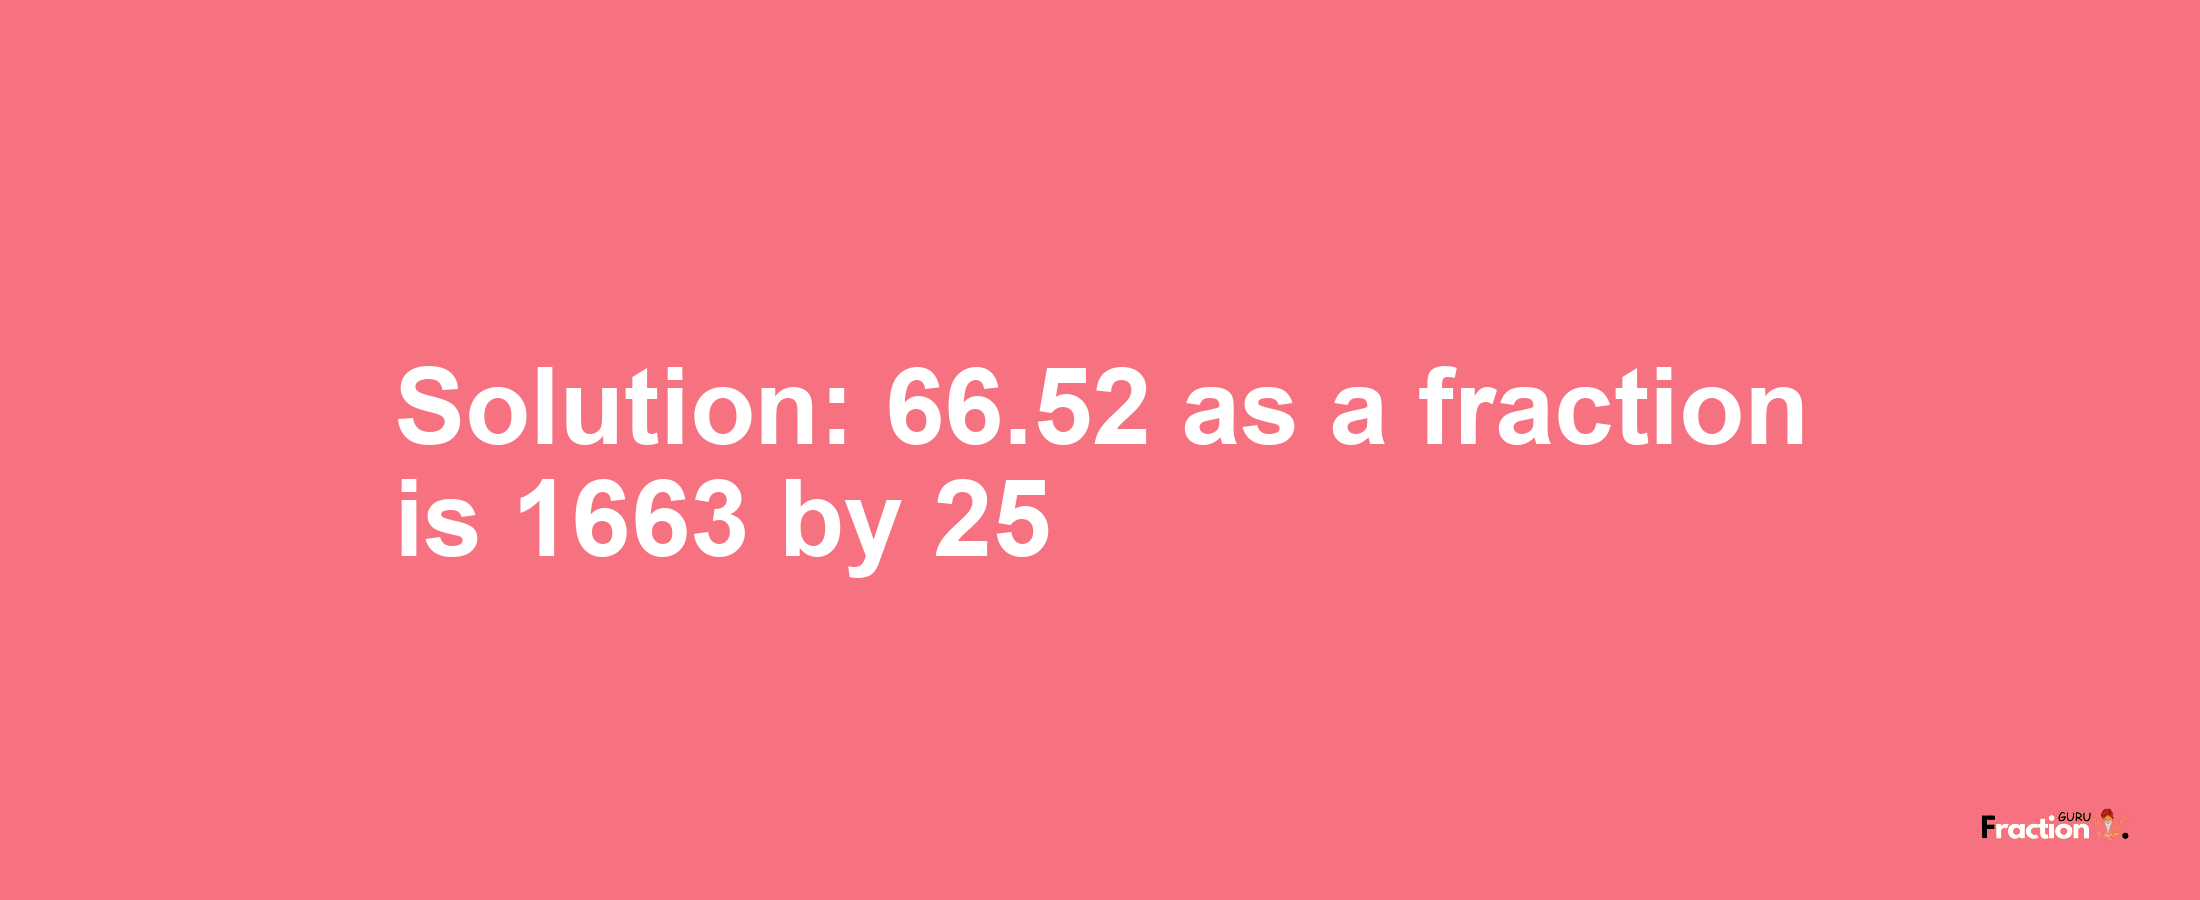 Solution:66.52 as a fraction is 1663/25